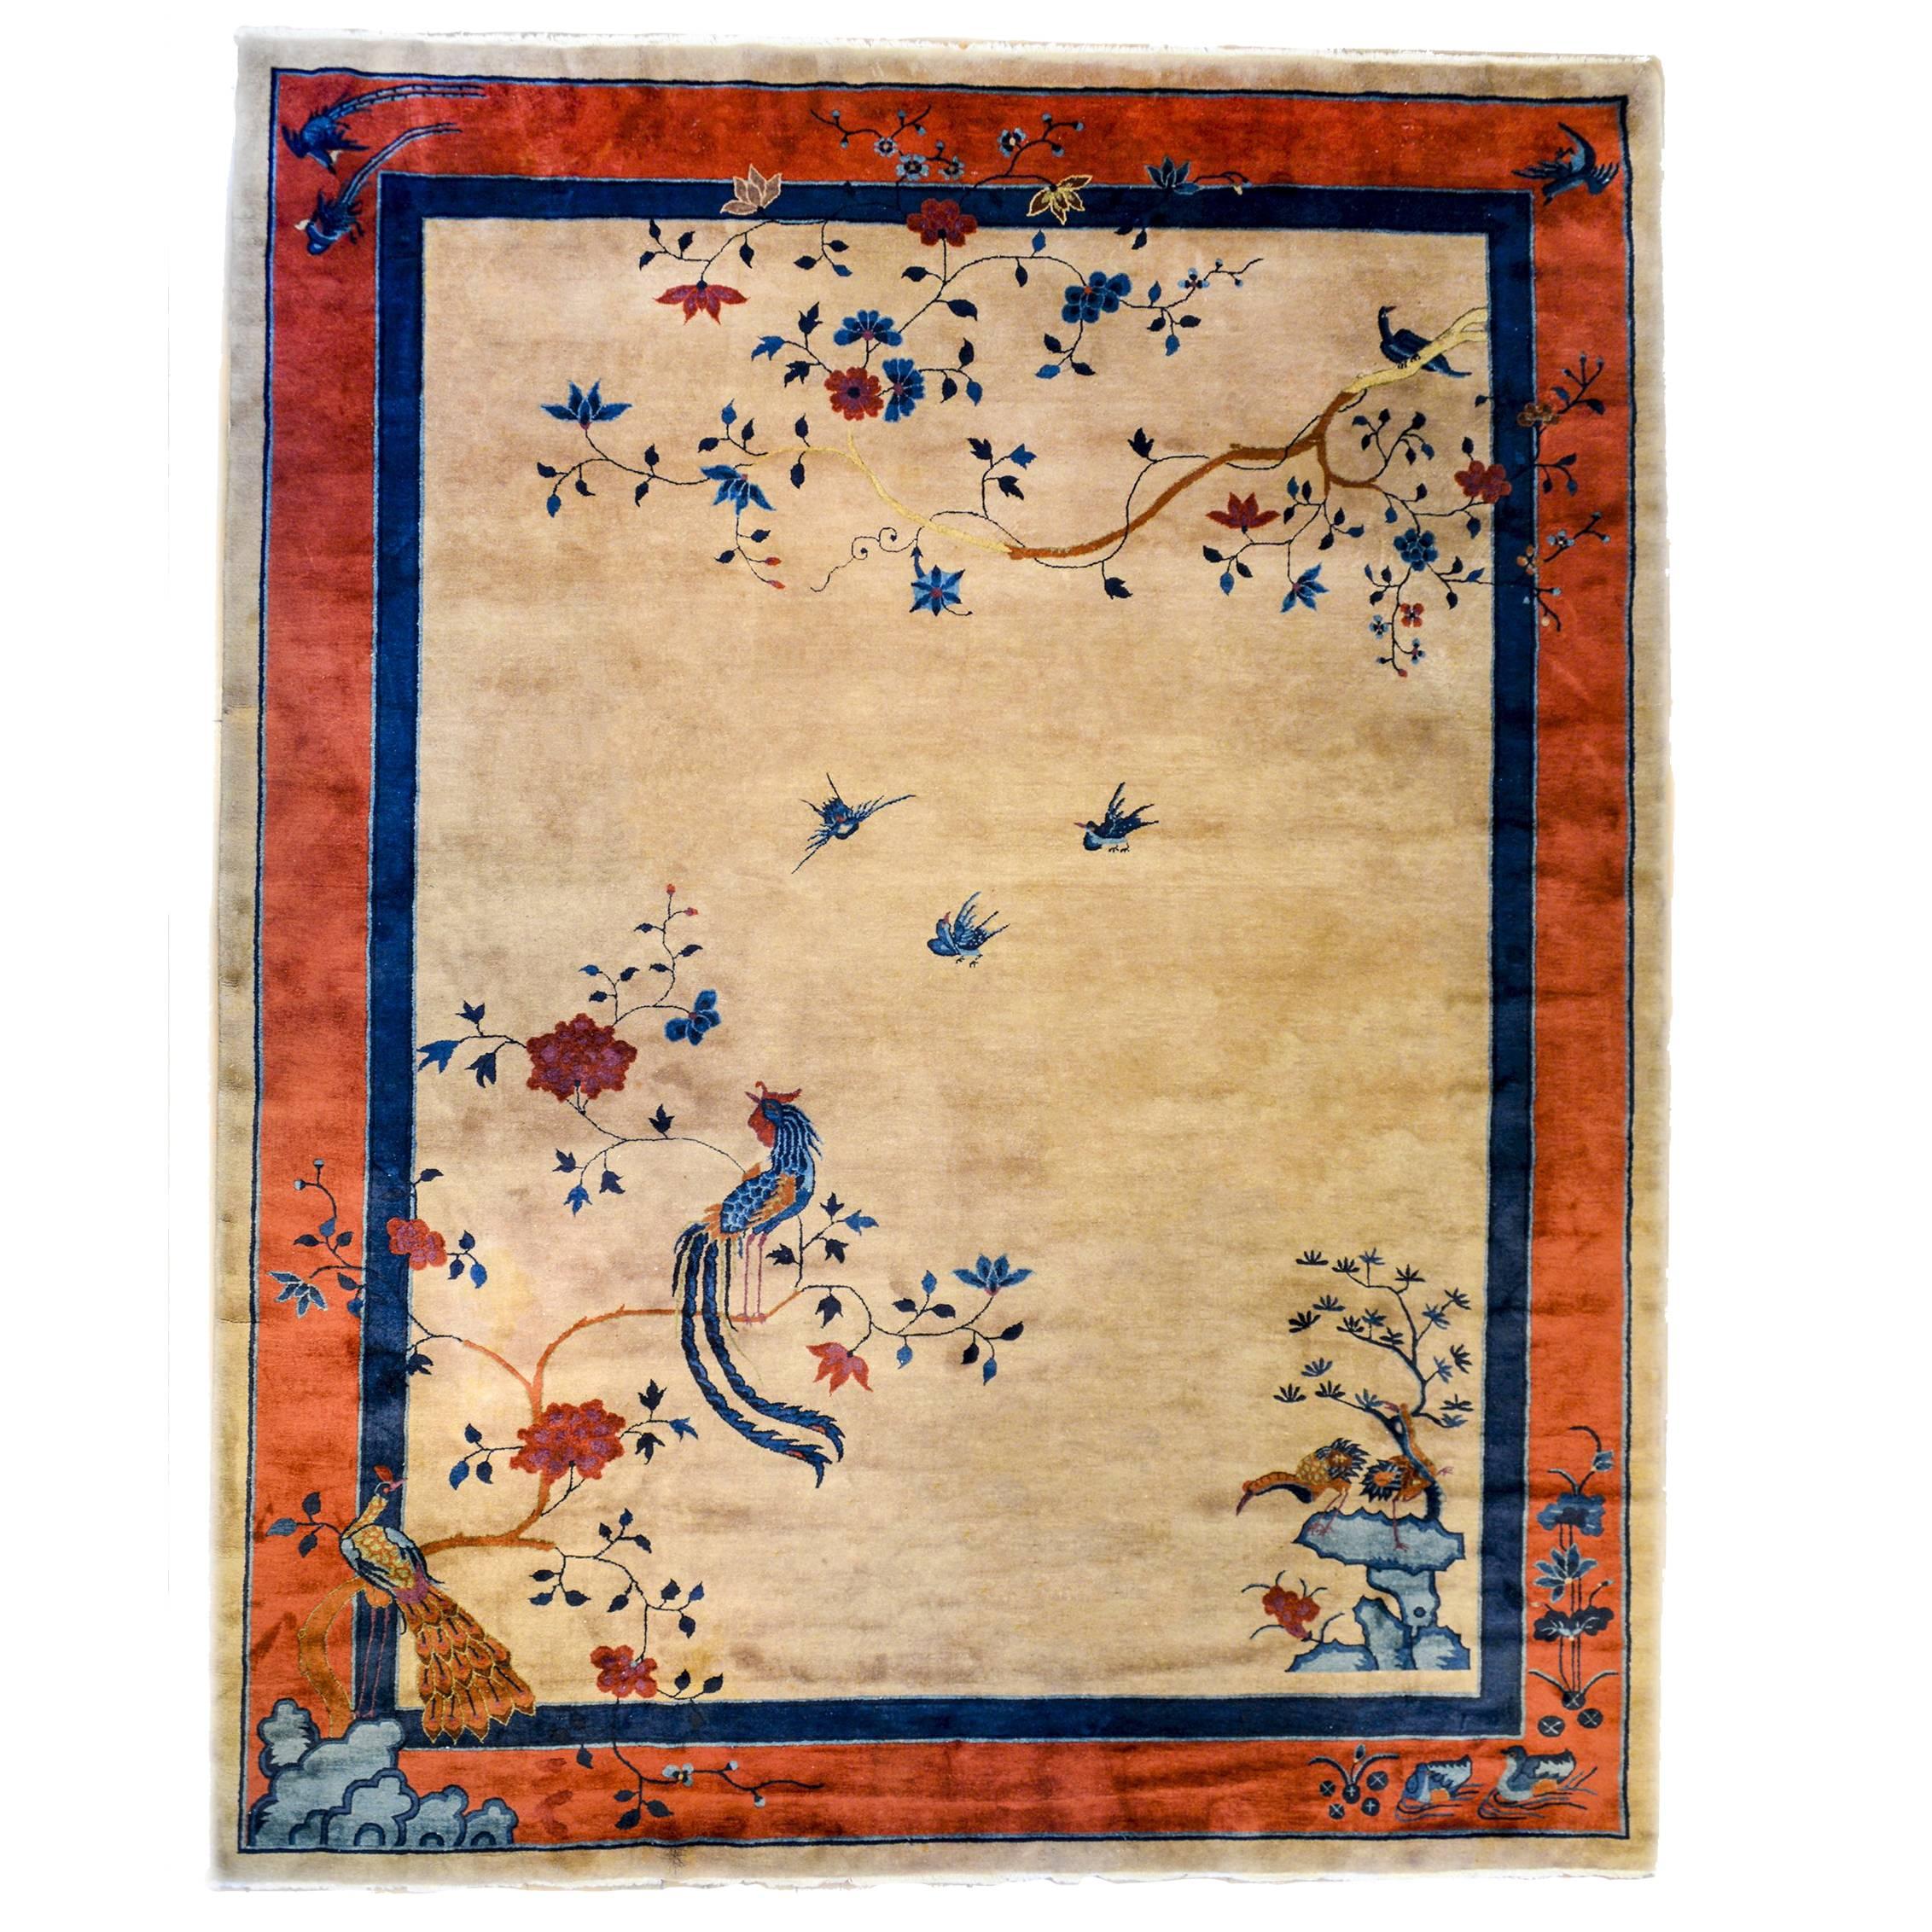 Chic Early 20th Century Chinese Art Deco Rug